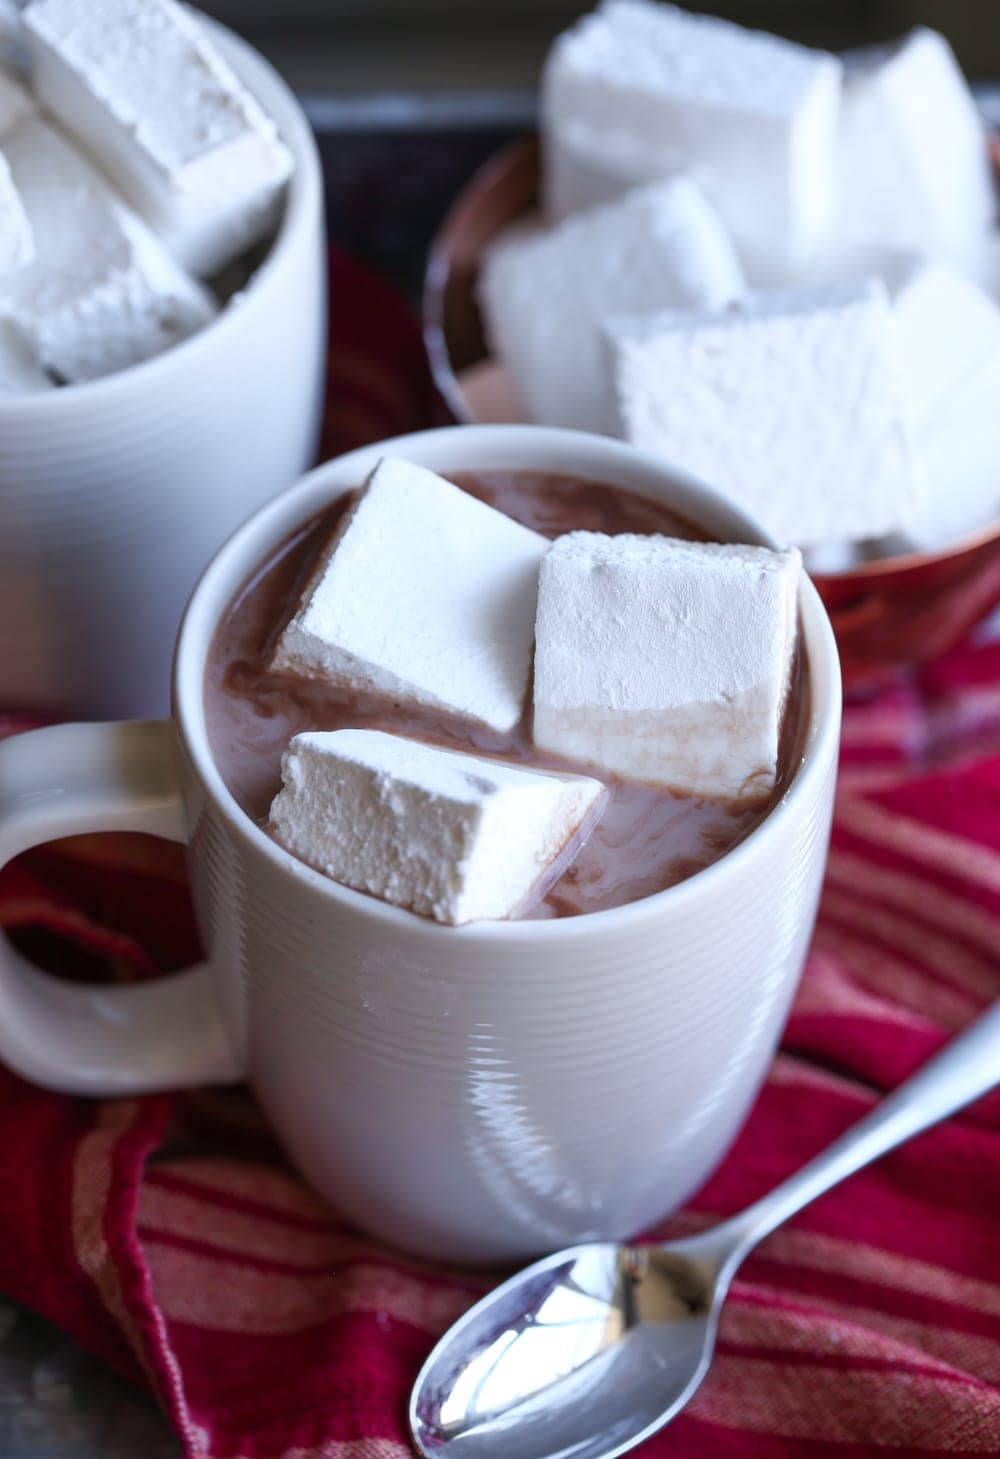 Three Homemade Marshmallows Floating in a Mug of Hot Chocolate